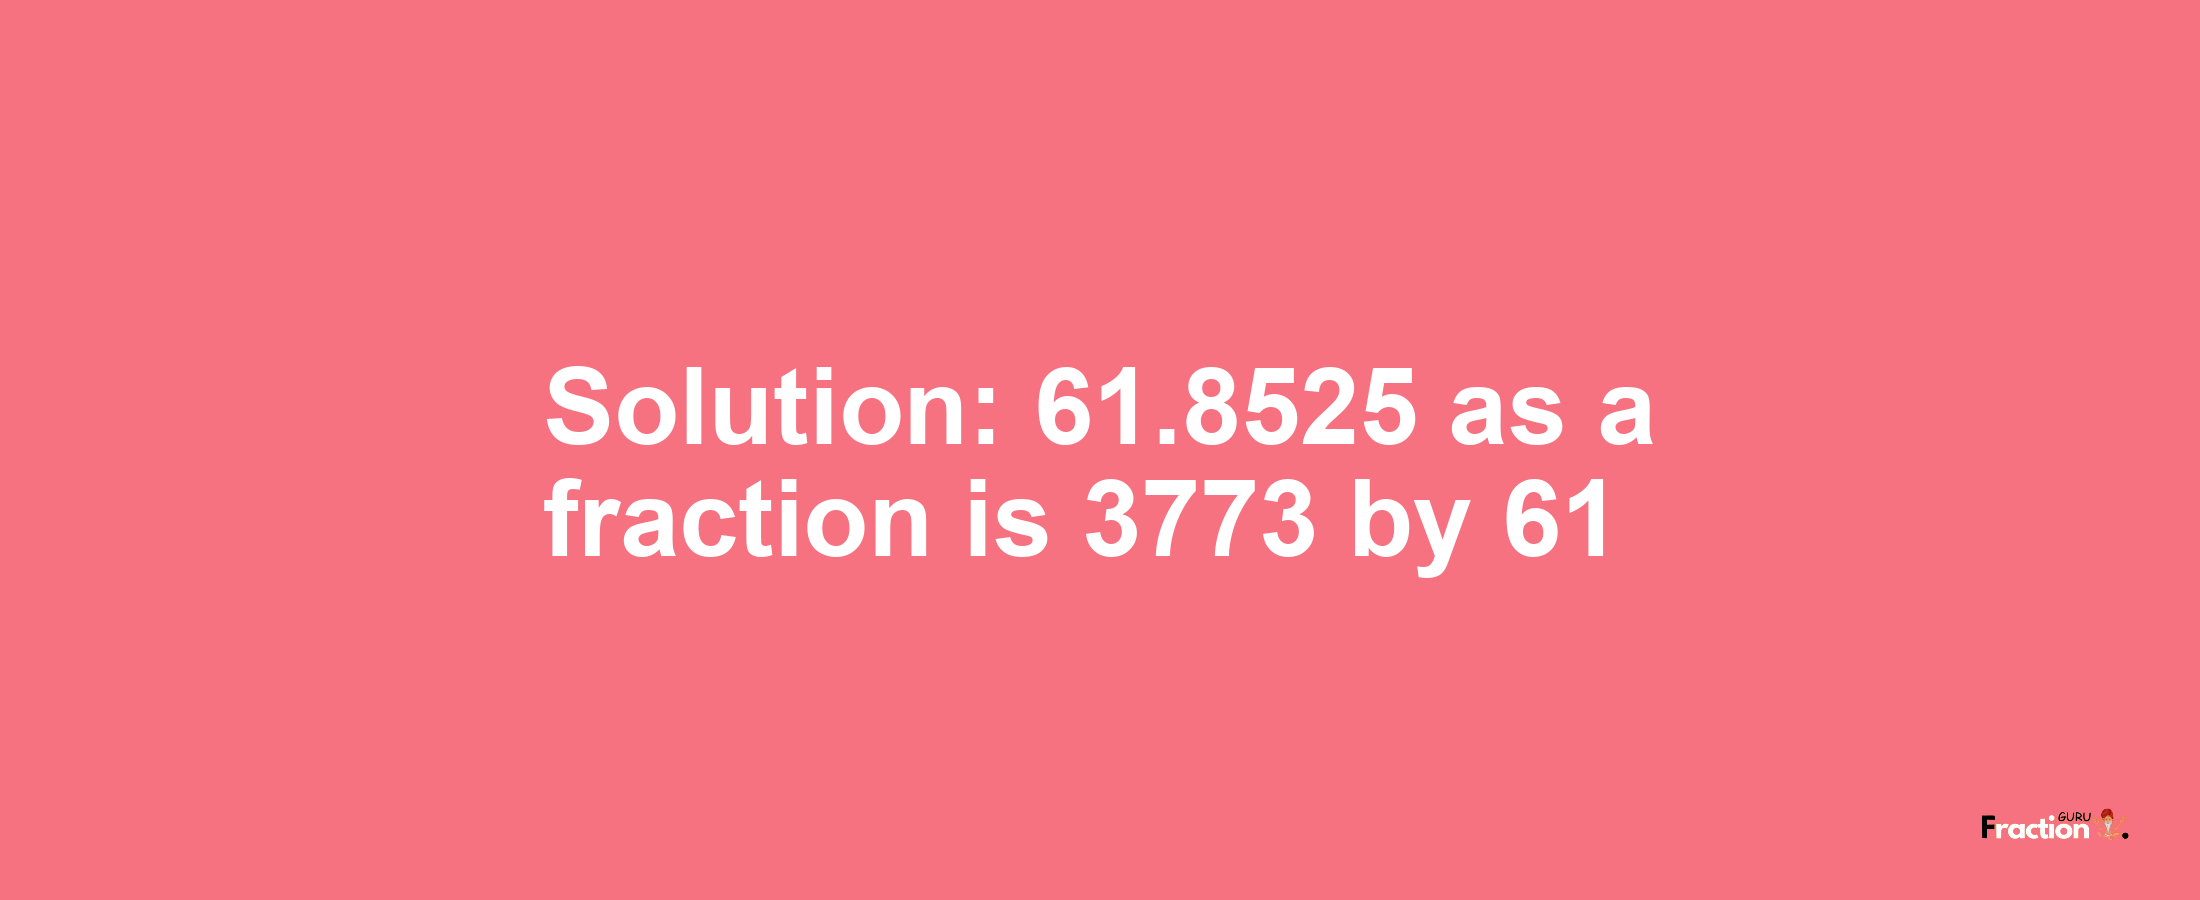 Solution:61.8525 as a fraction is 3773/61